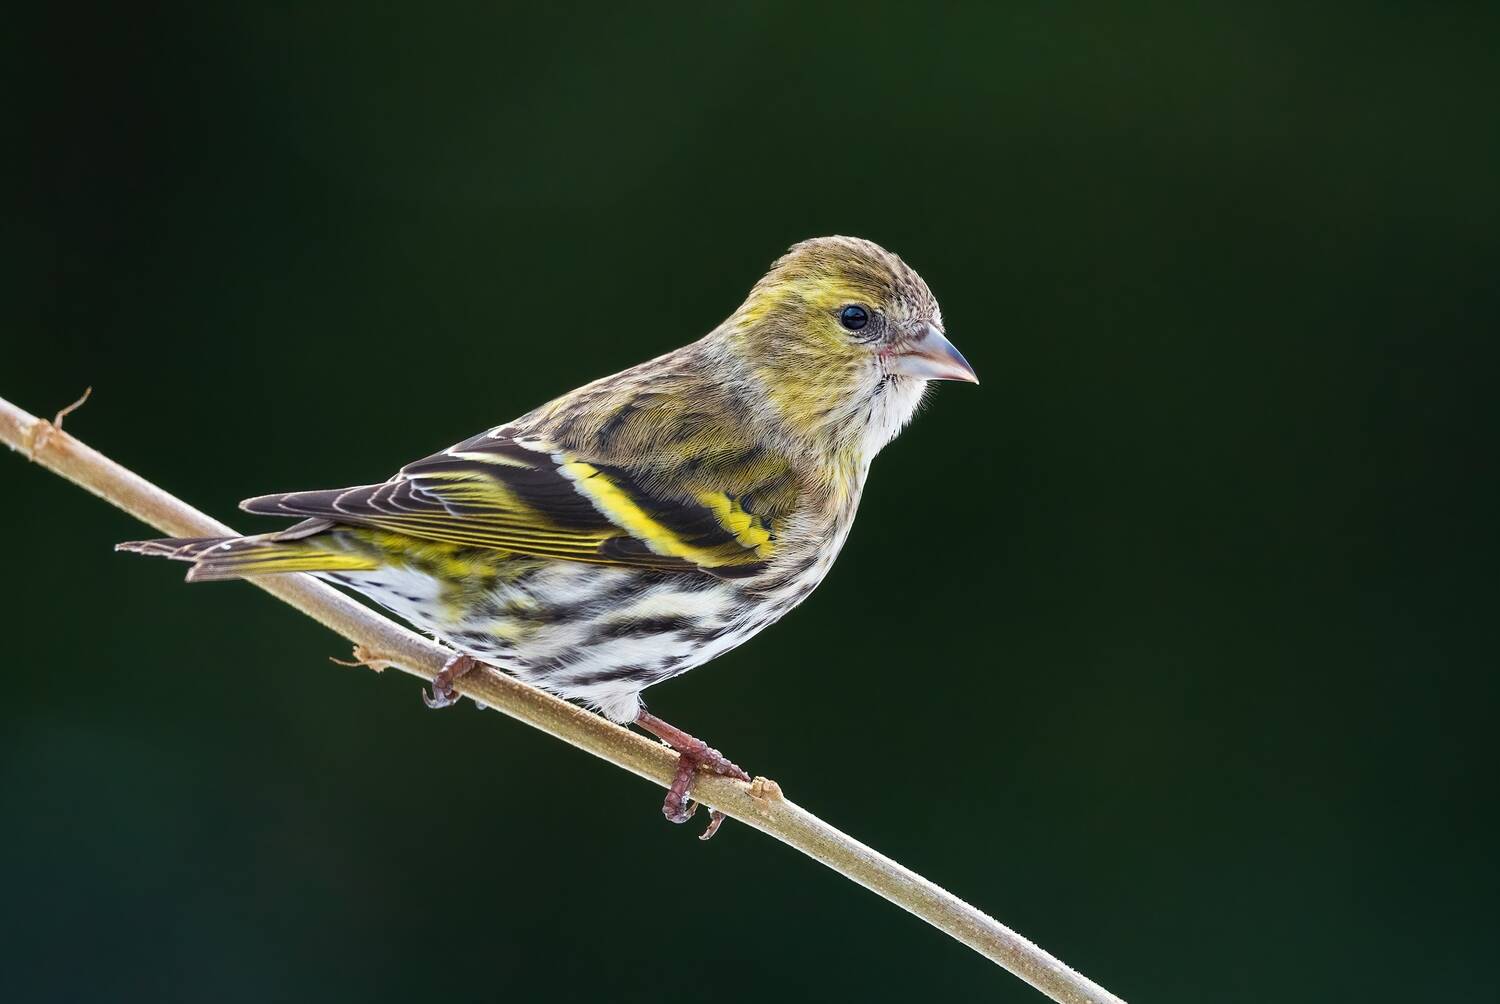 A small brown and yellow bird sits on a narrow twig, against a dark background. It looks like a small finch.